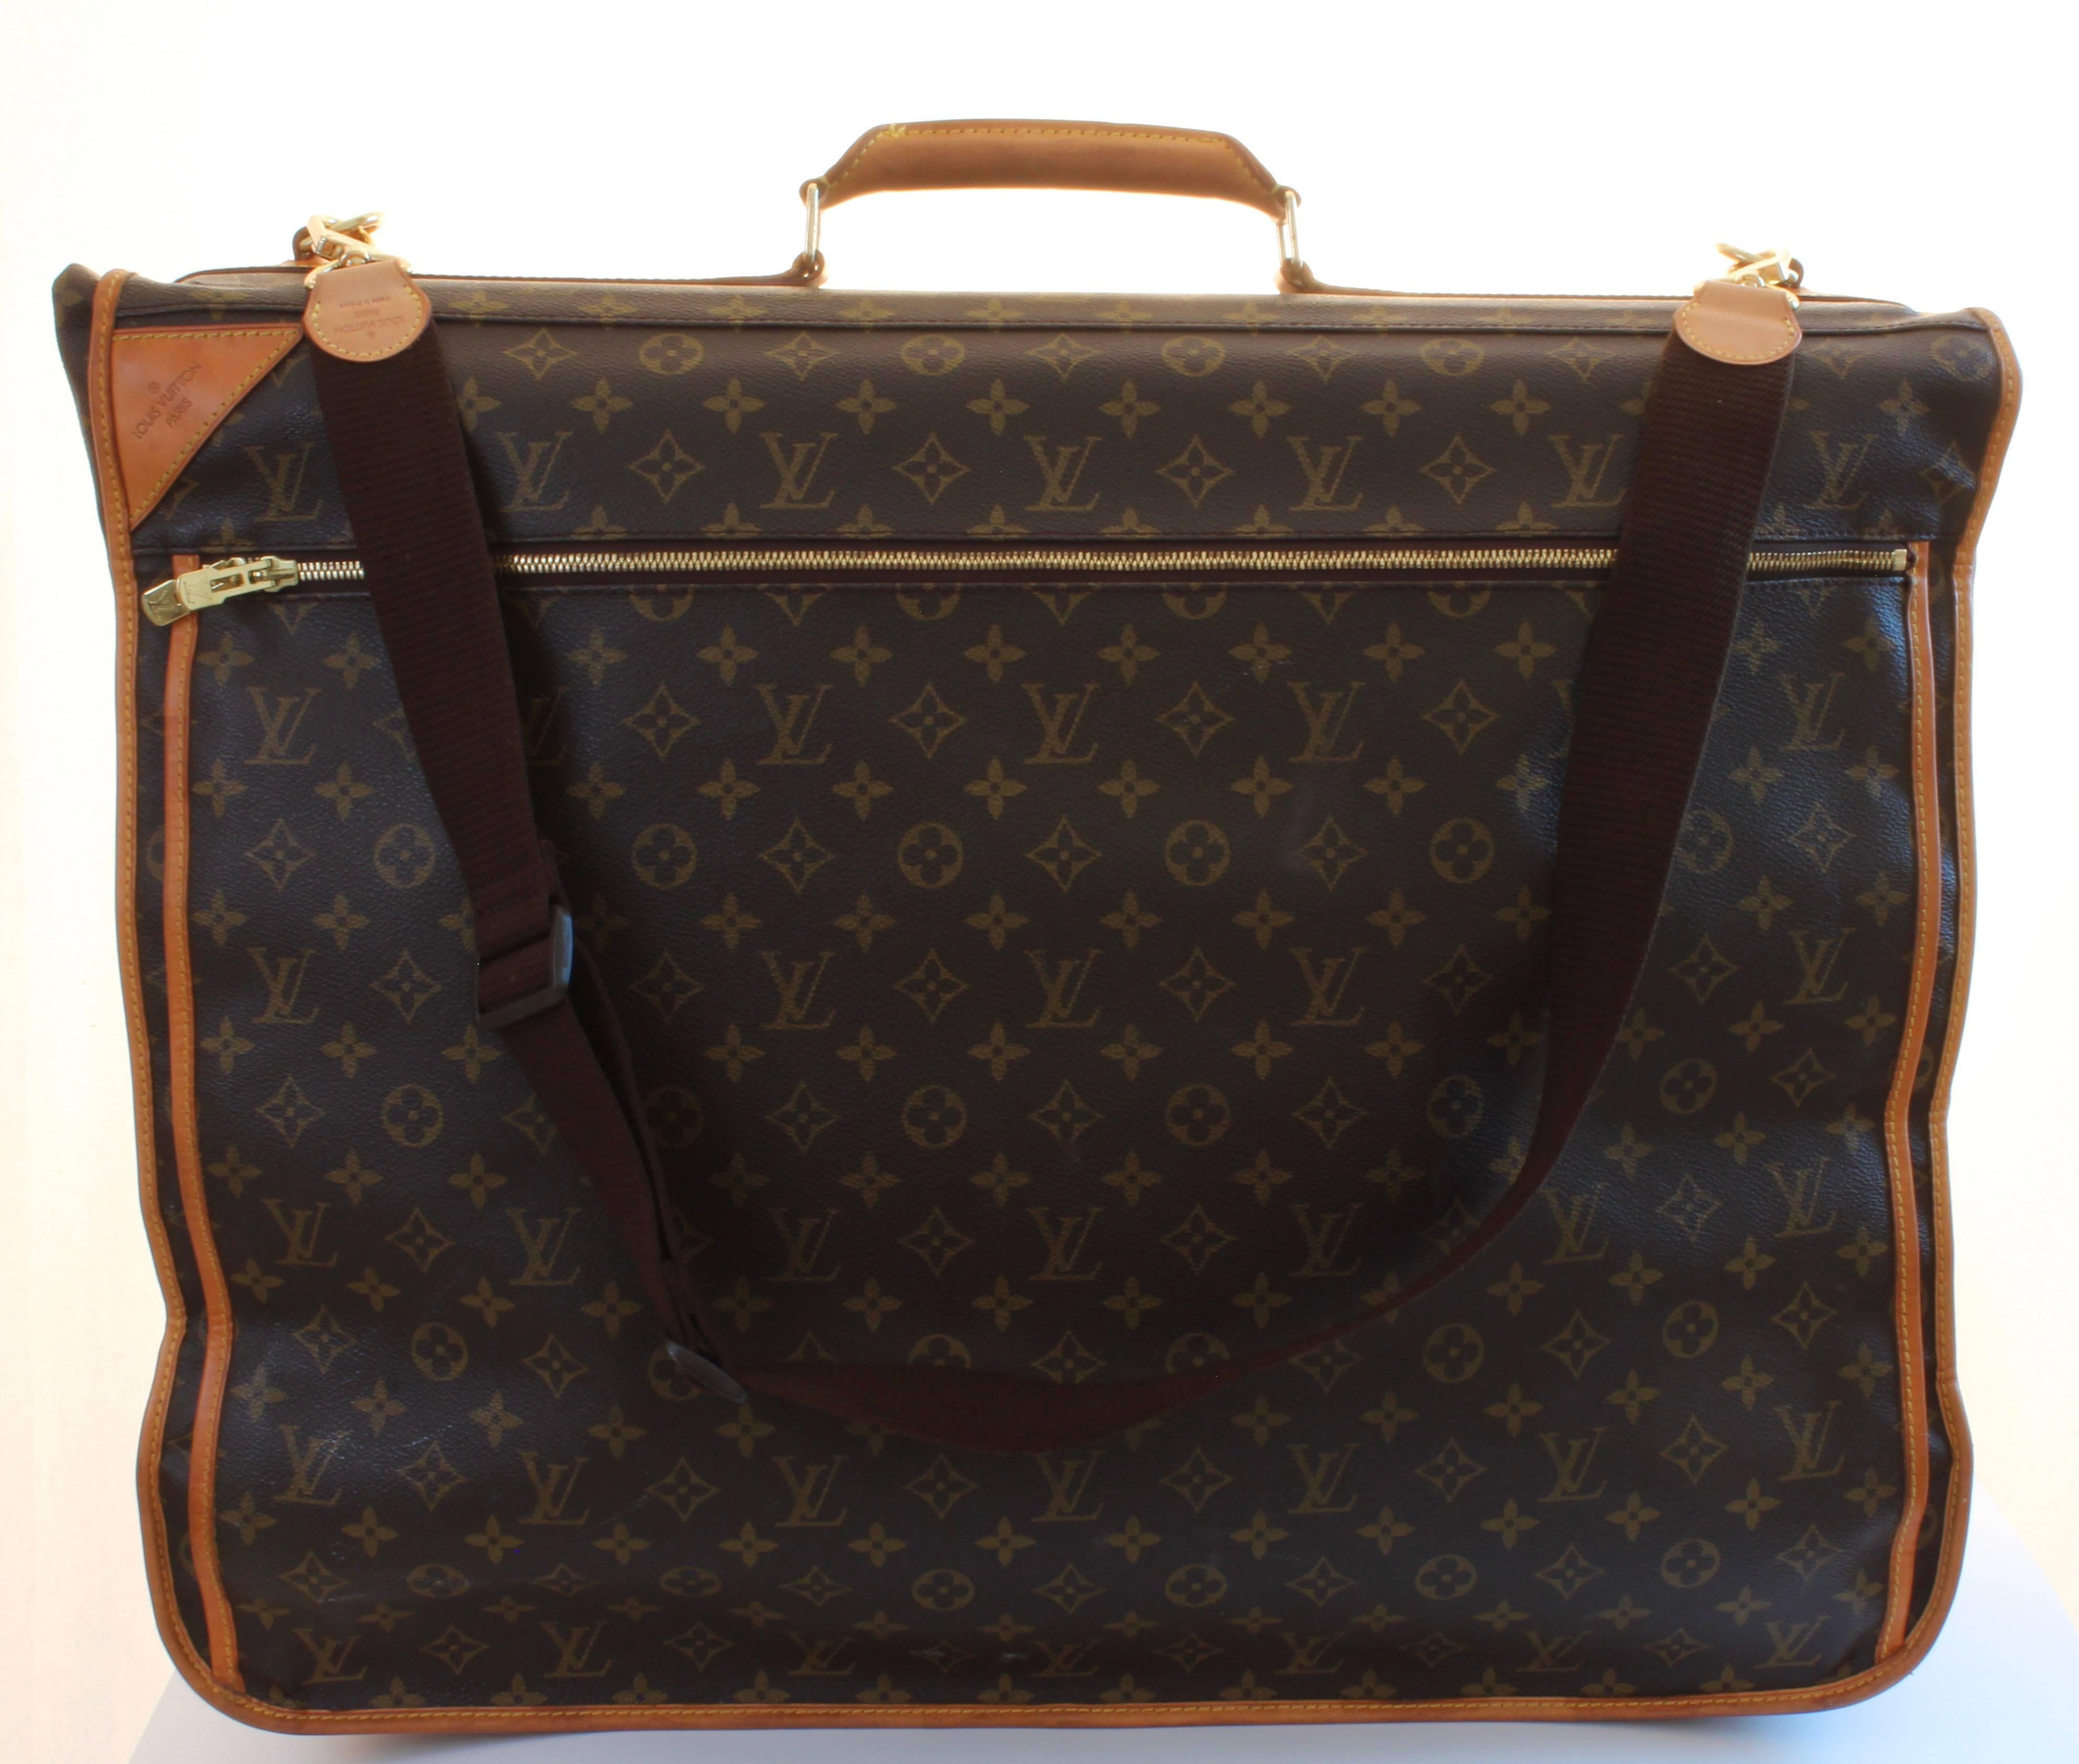 This fabulous travel piece was made by Louis Vuitton in 1999 and it holds a ton!  Crafted of their signature monogram canvas and trimmed in vachetta leather, it features a rolled leather handle and two gold metal LV clasps at each side.  There's a